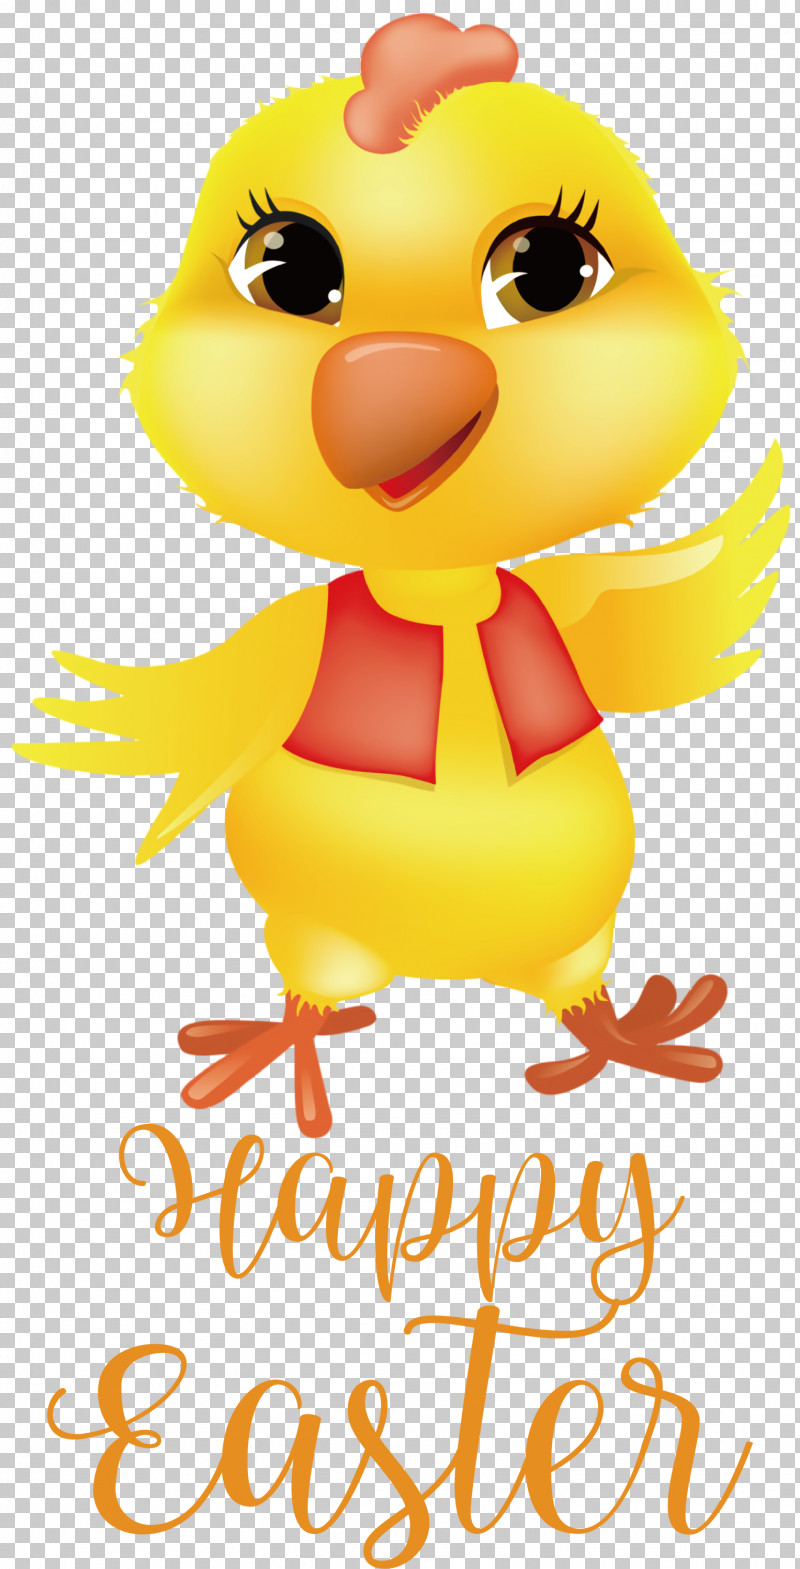 Happy Easter Chicken And Ducklings PNG, Clipart, Chicken, Chicken And Ducklings, Chicken Egg, Chocolate Bunny, Deviled Egg Free PNG Download